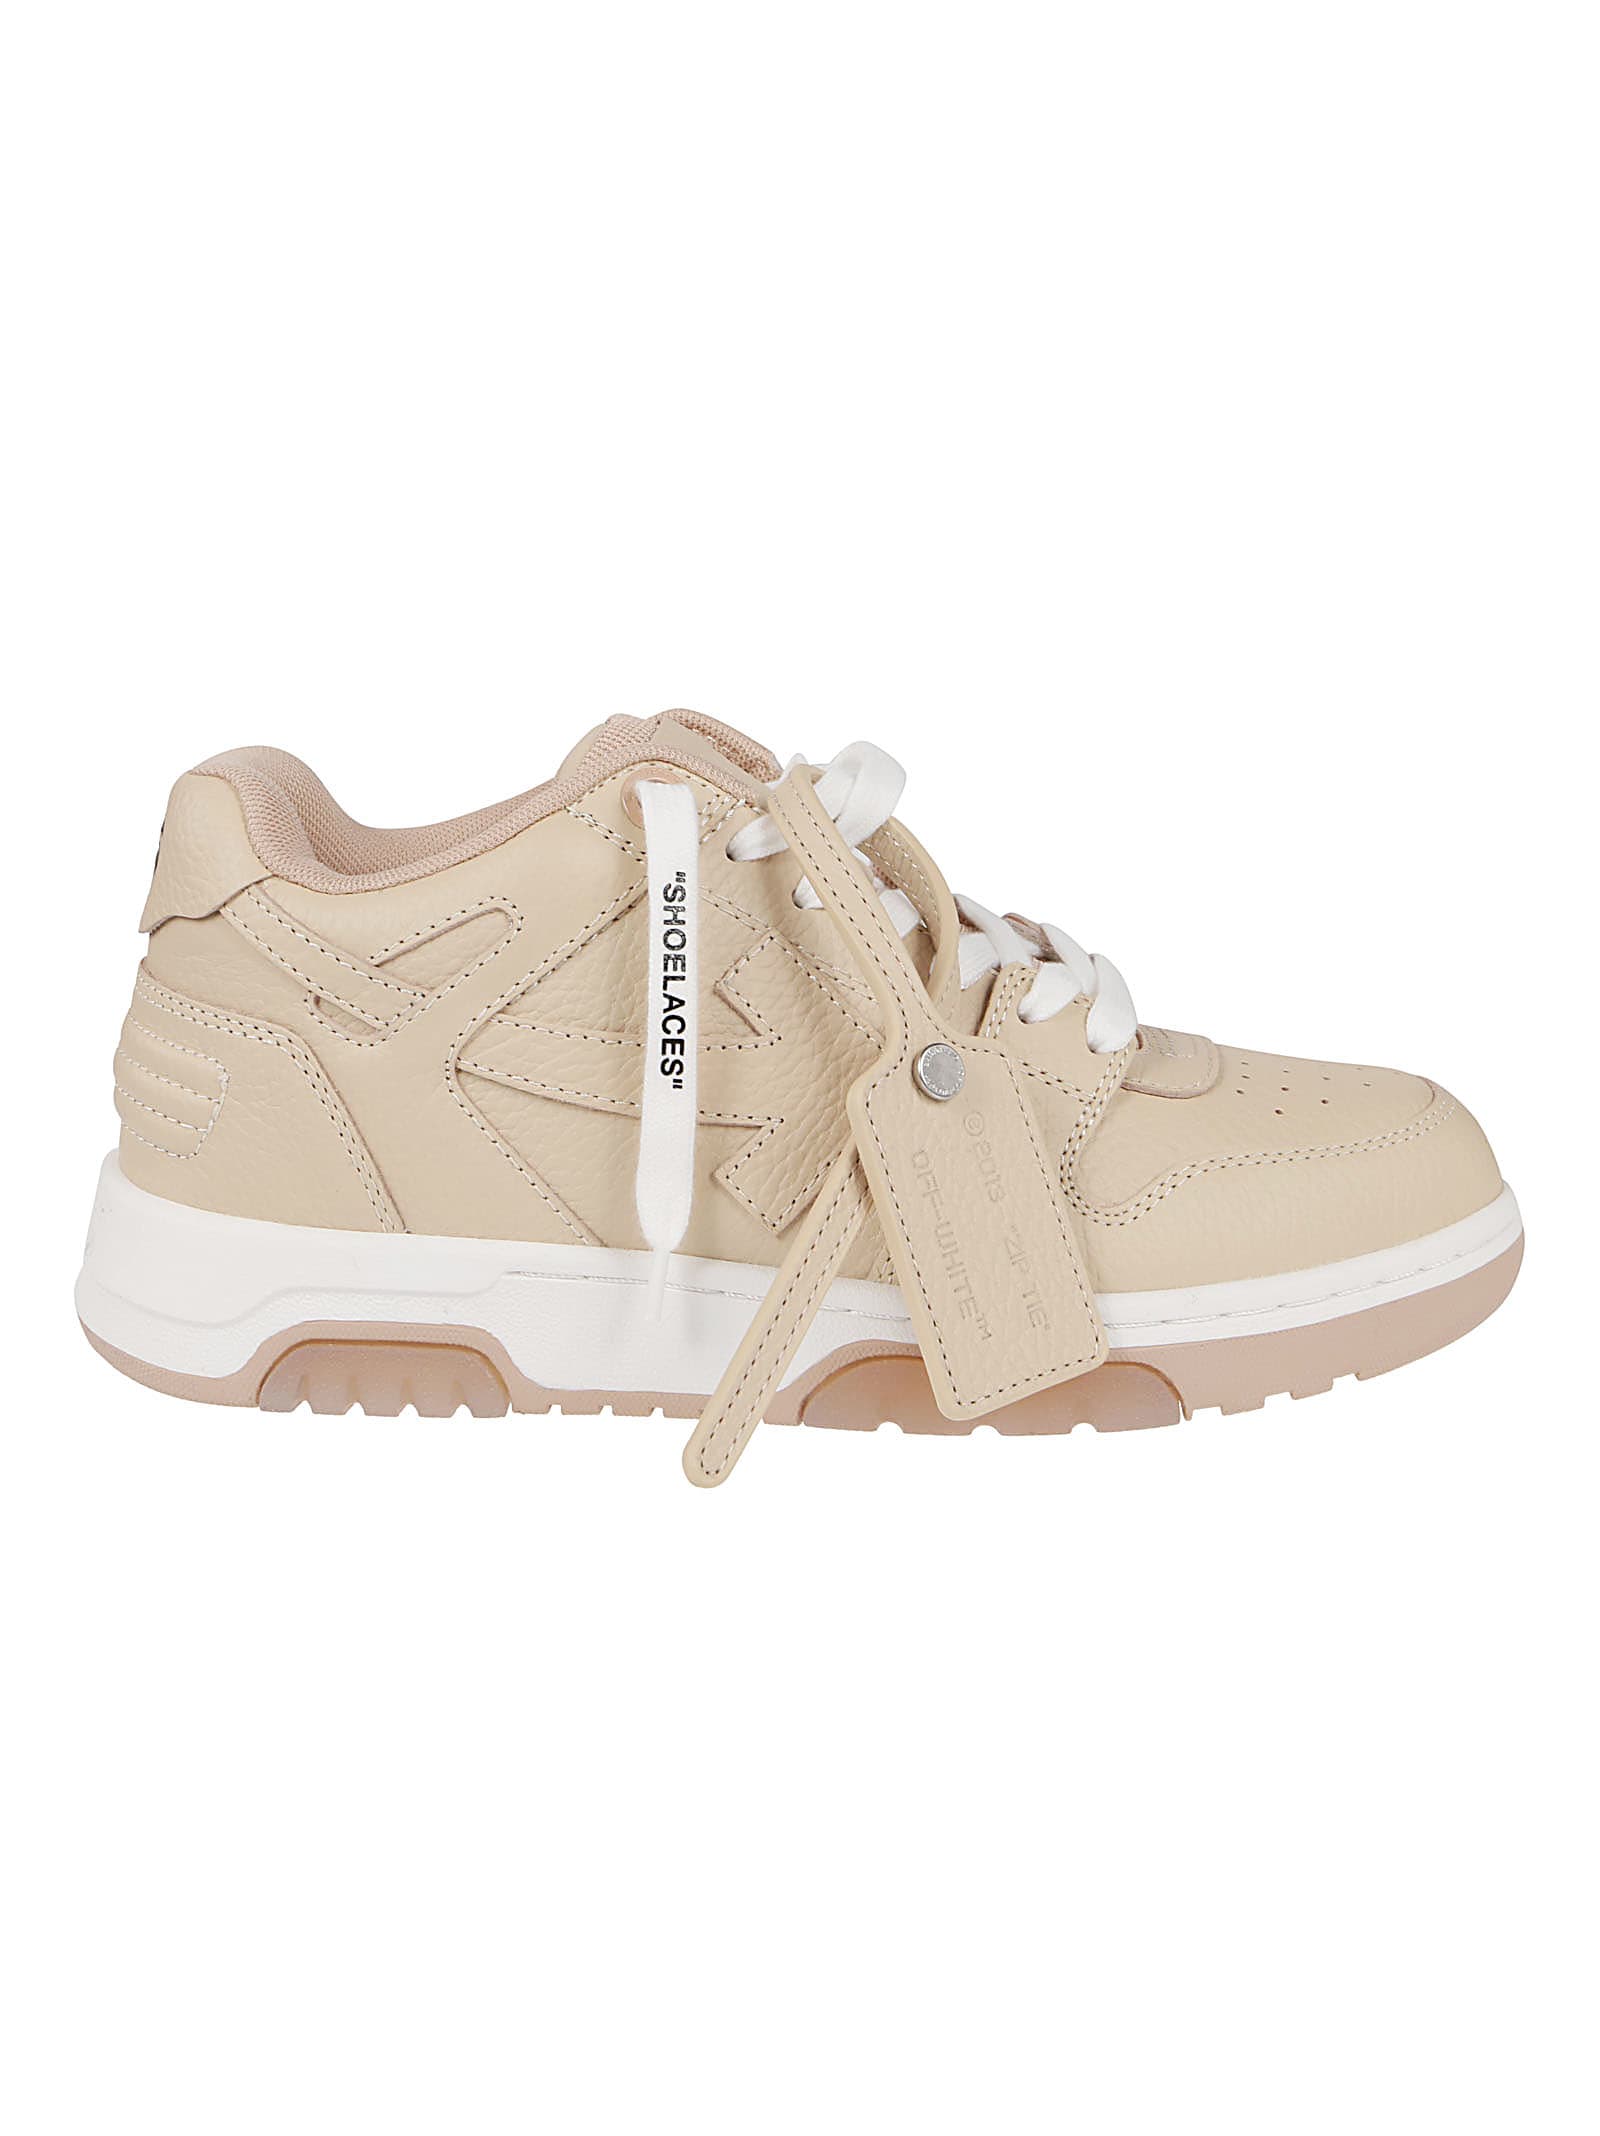 Off-White | Women 30mm Out of Office Leather Sneakers White/Pink 40